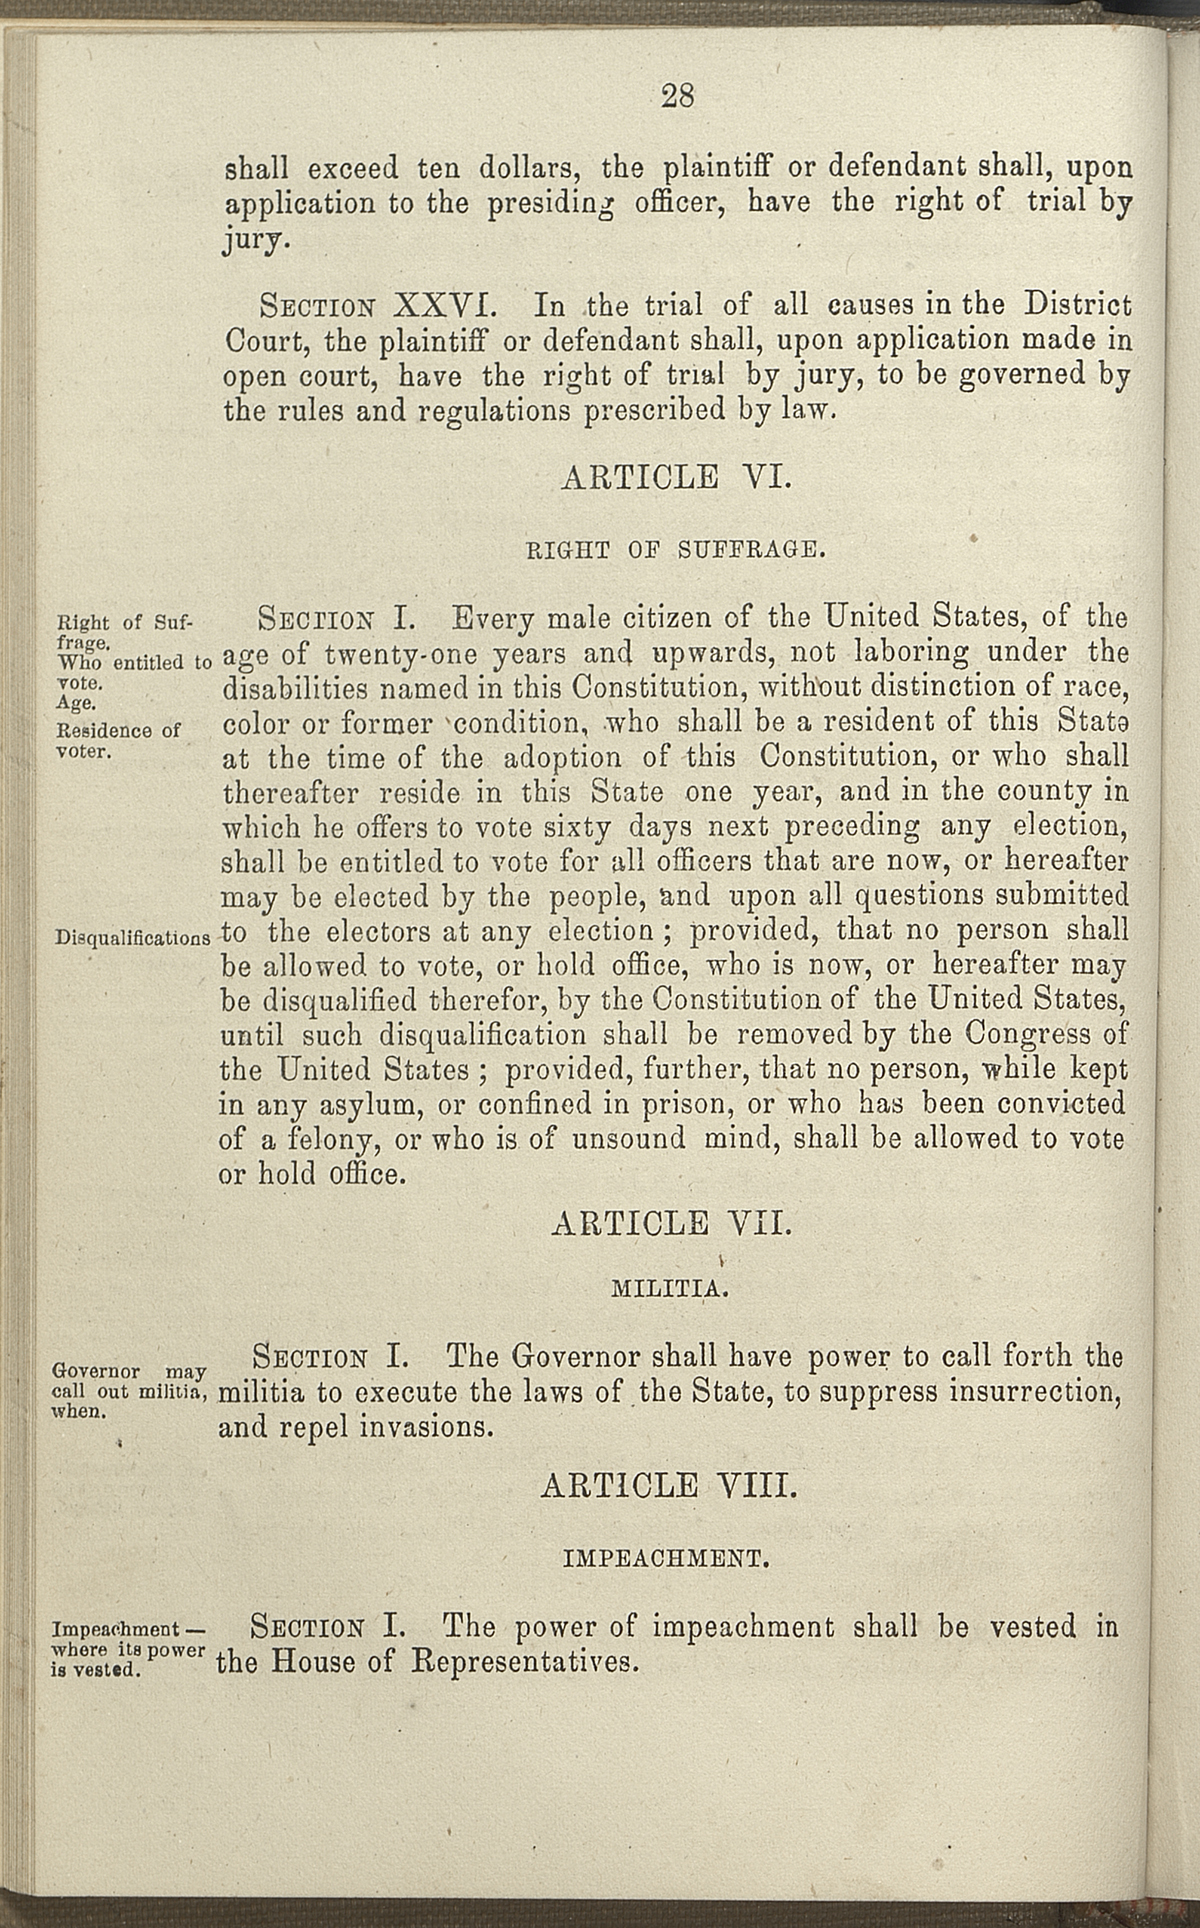 Article VIII, Section 1